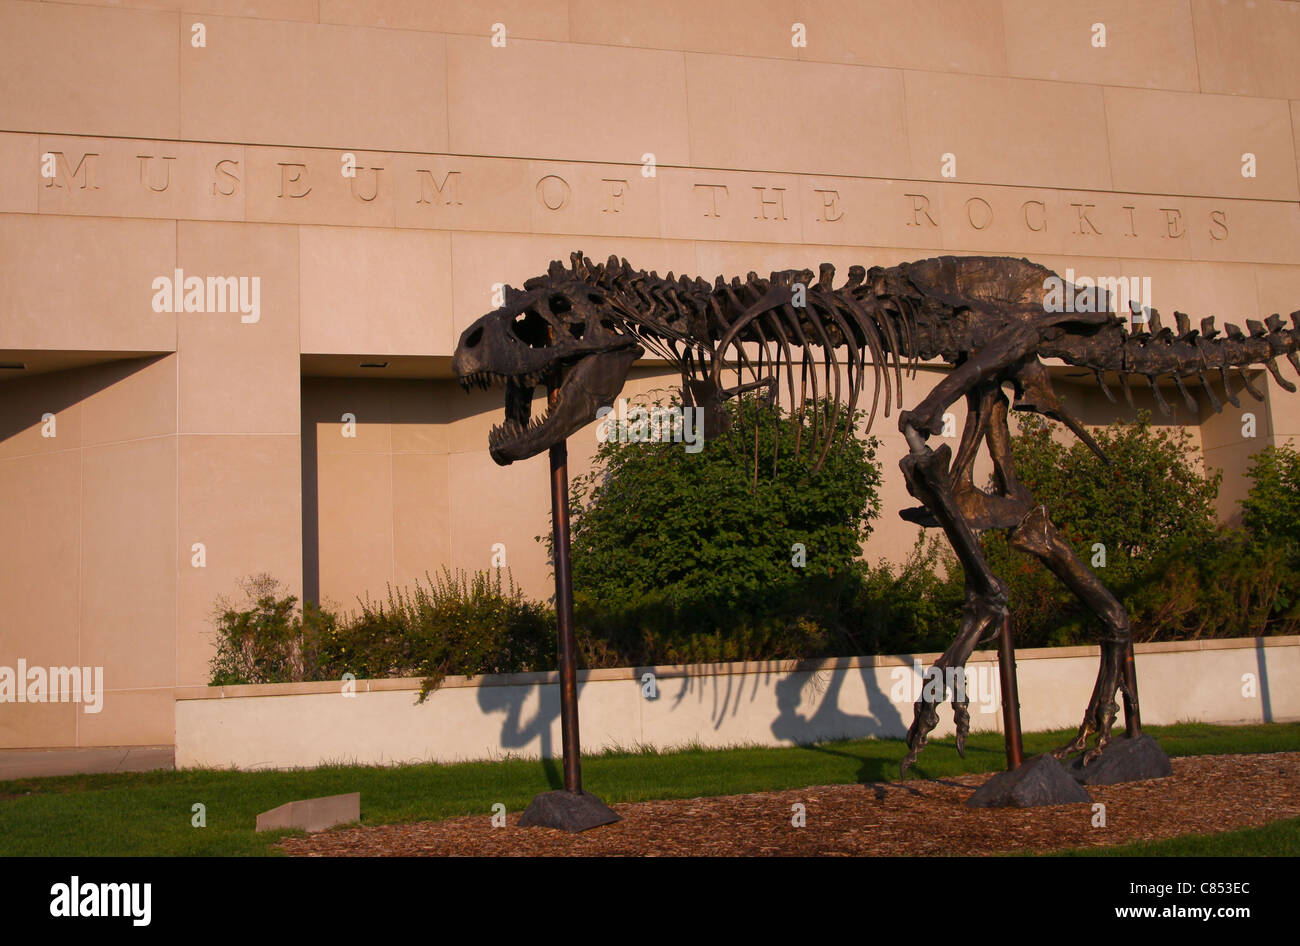 'Big Mike' in front of the Museum of the Rockies in Bozeman, Montana is famous for its dinosaur fossils and natural history. Stock Photo